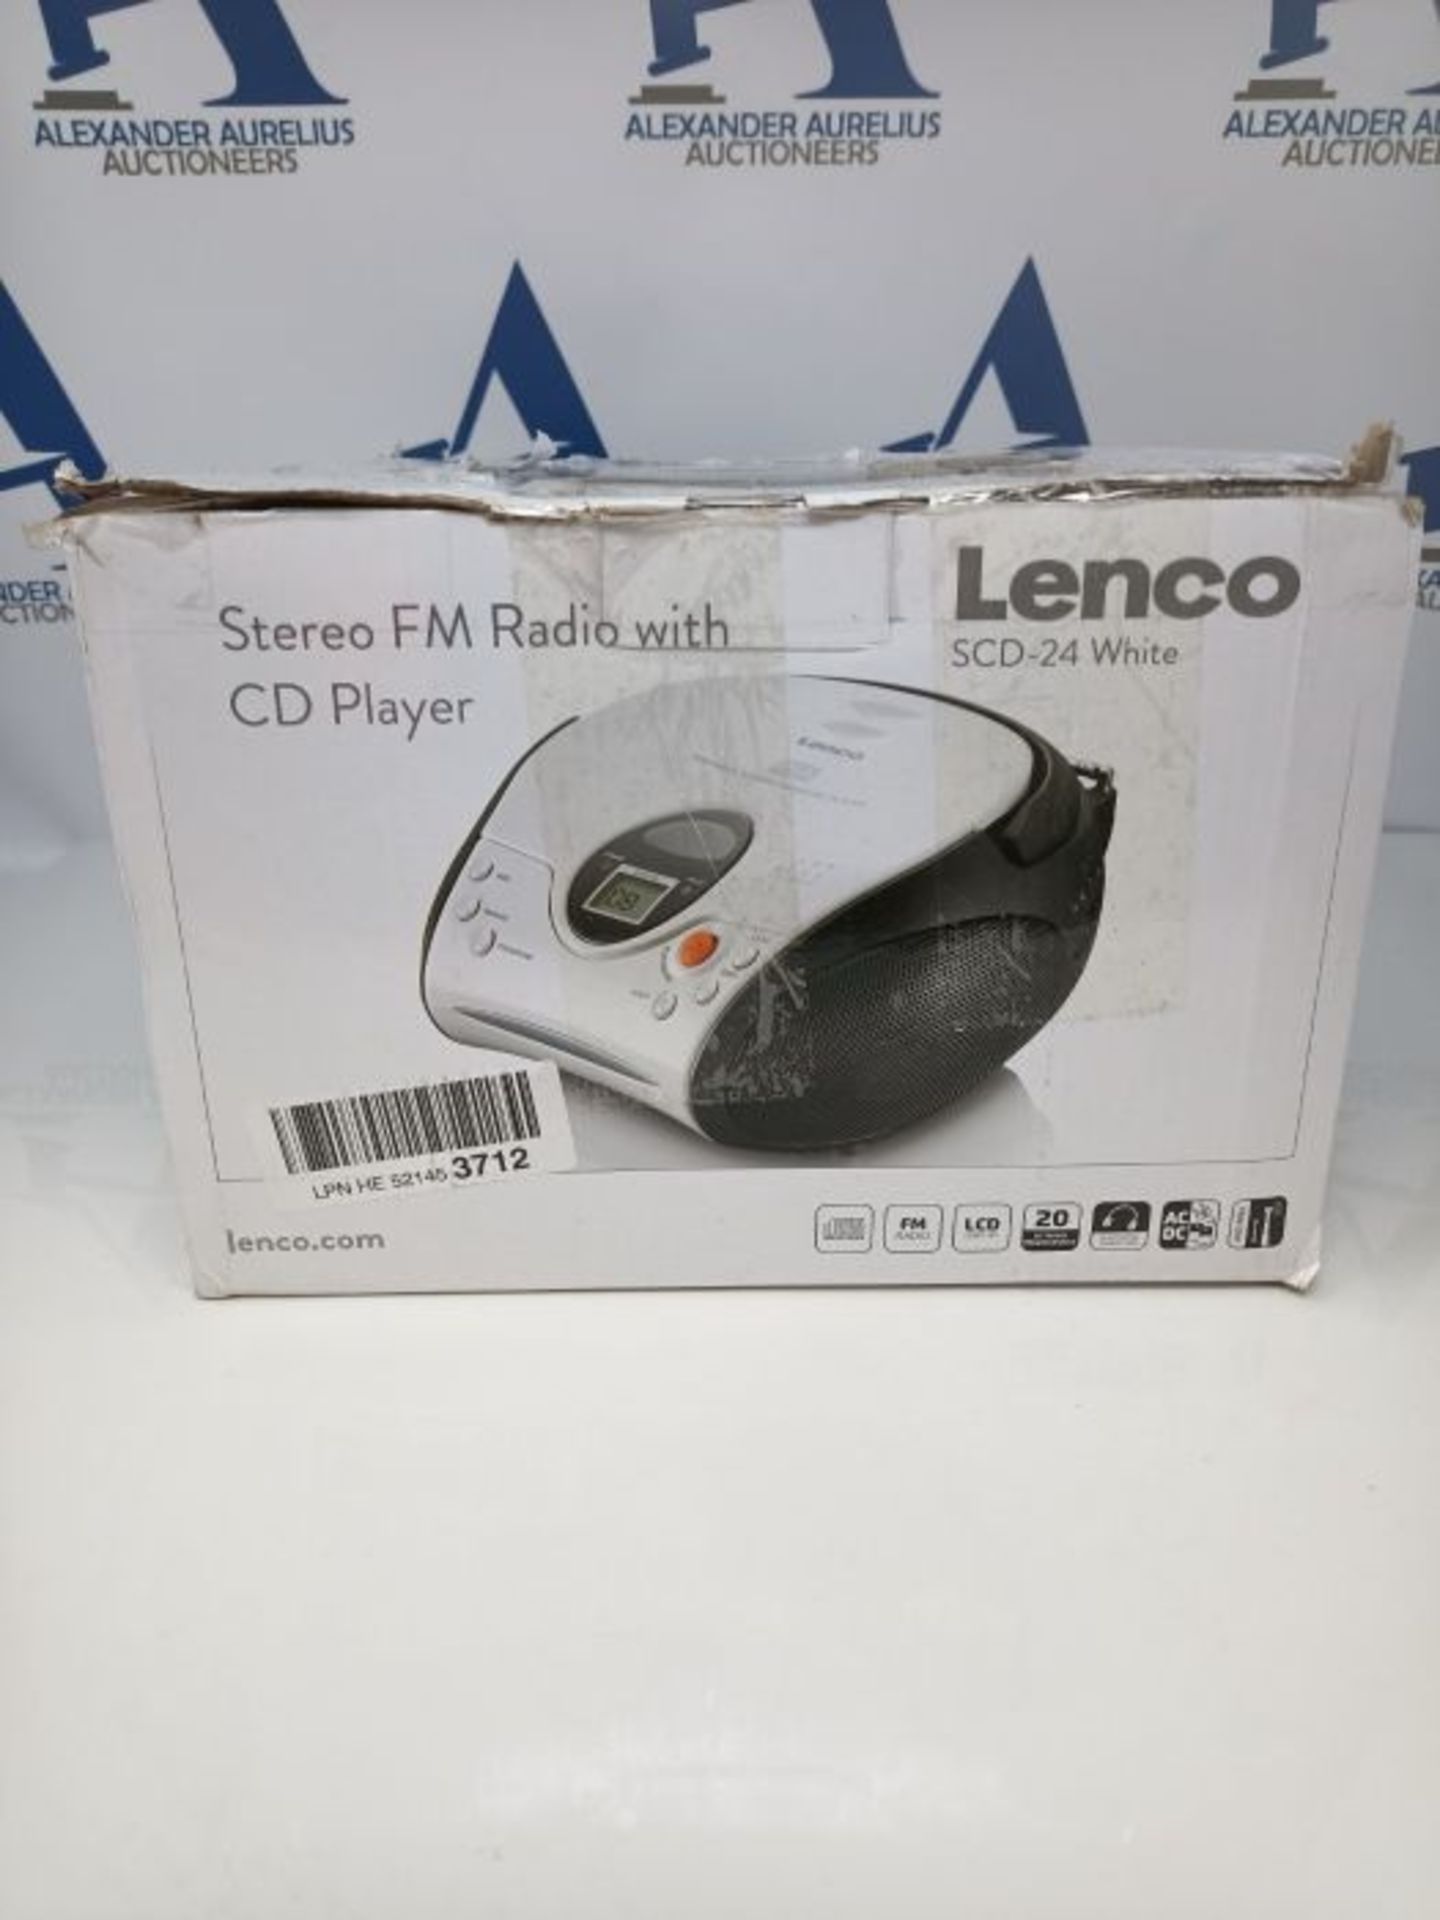 Lenco SCD-24 Portable Stereo Boombox with Programmable CD Player & FM Radio - Black & - Image 2 of 3